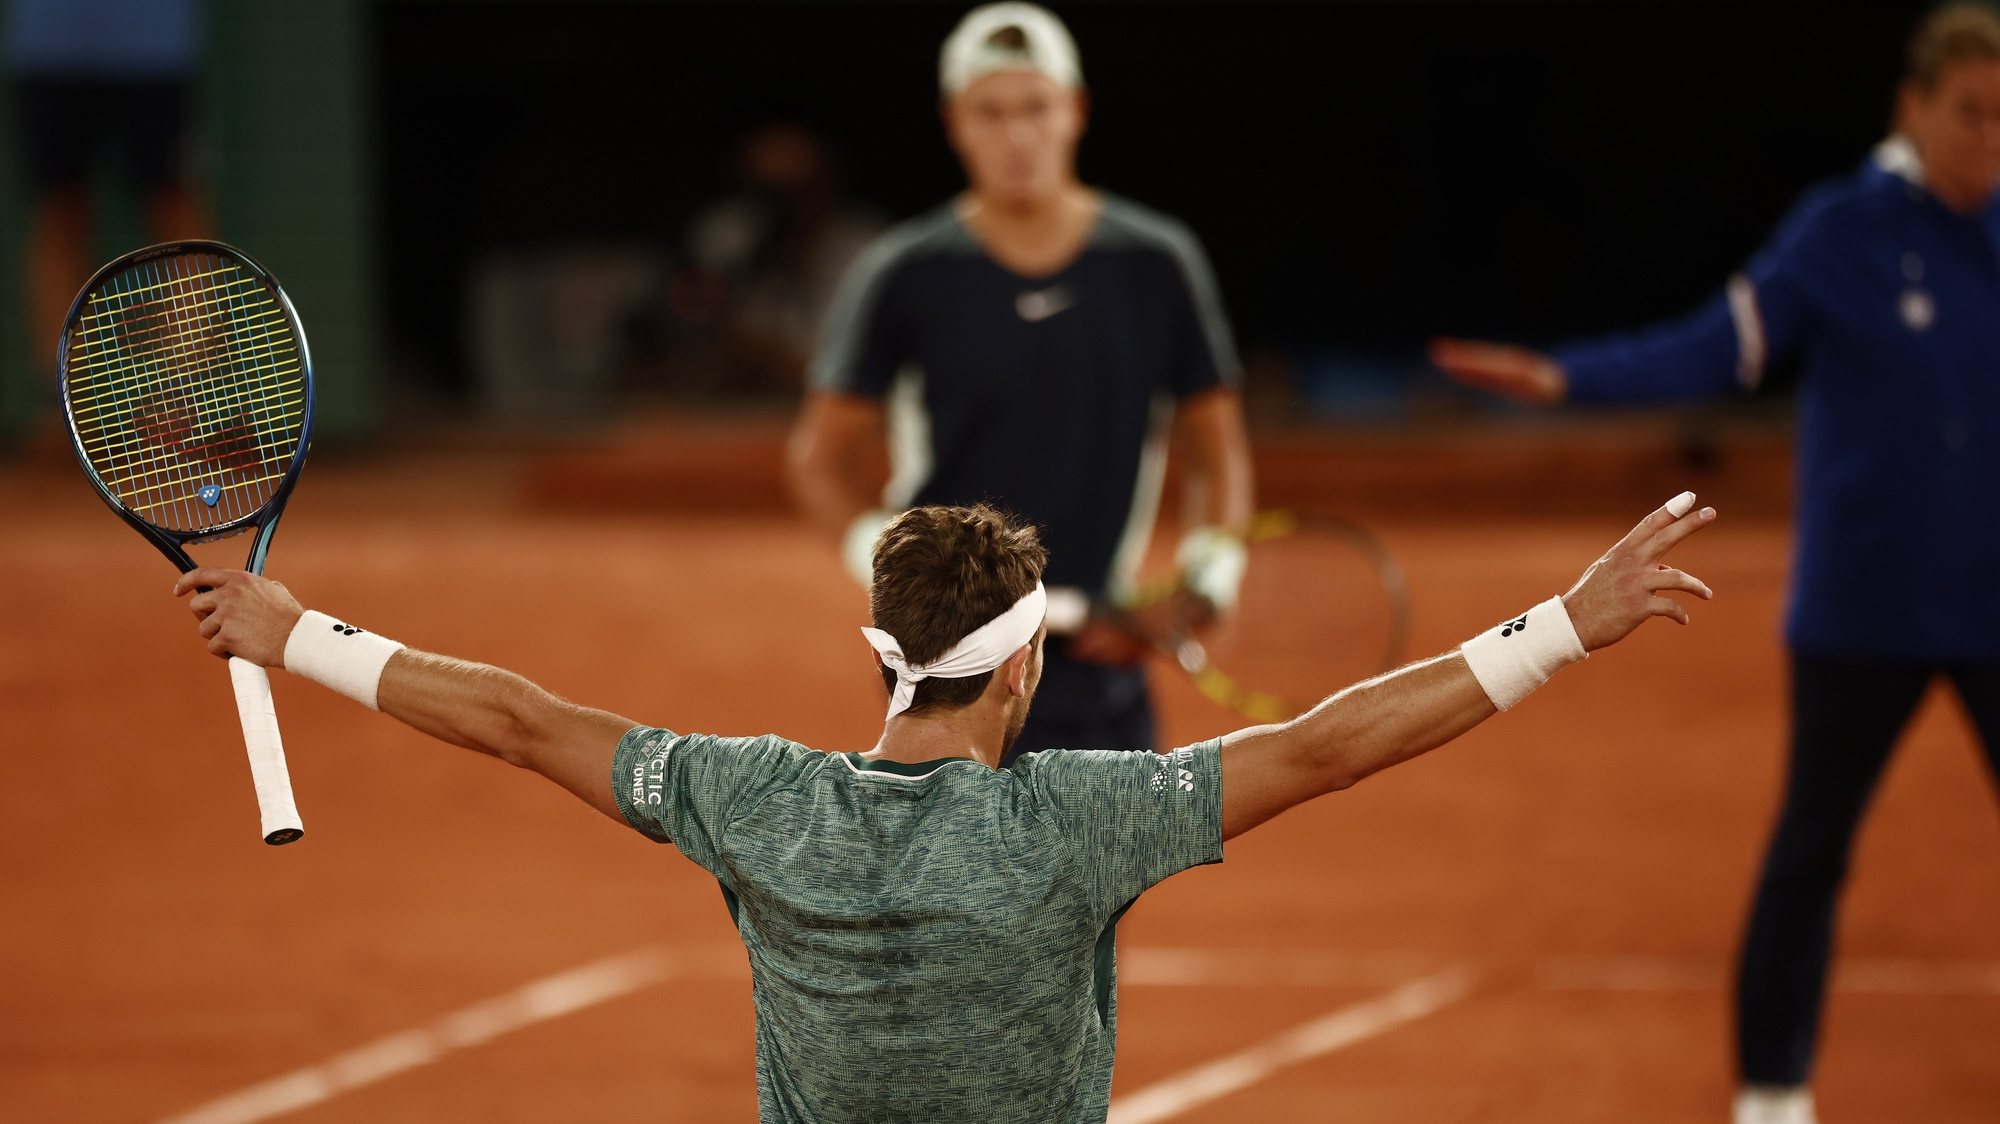 epa09990874 Casper Ruud (foreground) of Norway reacts after winning against Holger Rune (background) of Denmark in their men’s quarterfinal match during the French Open tennis tournament at Roland ​Garros in Paris, France, 01 June 2022.  EPA/YOAN VALAT